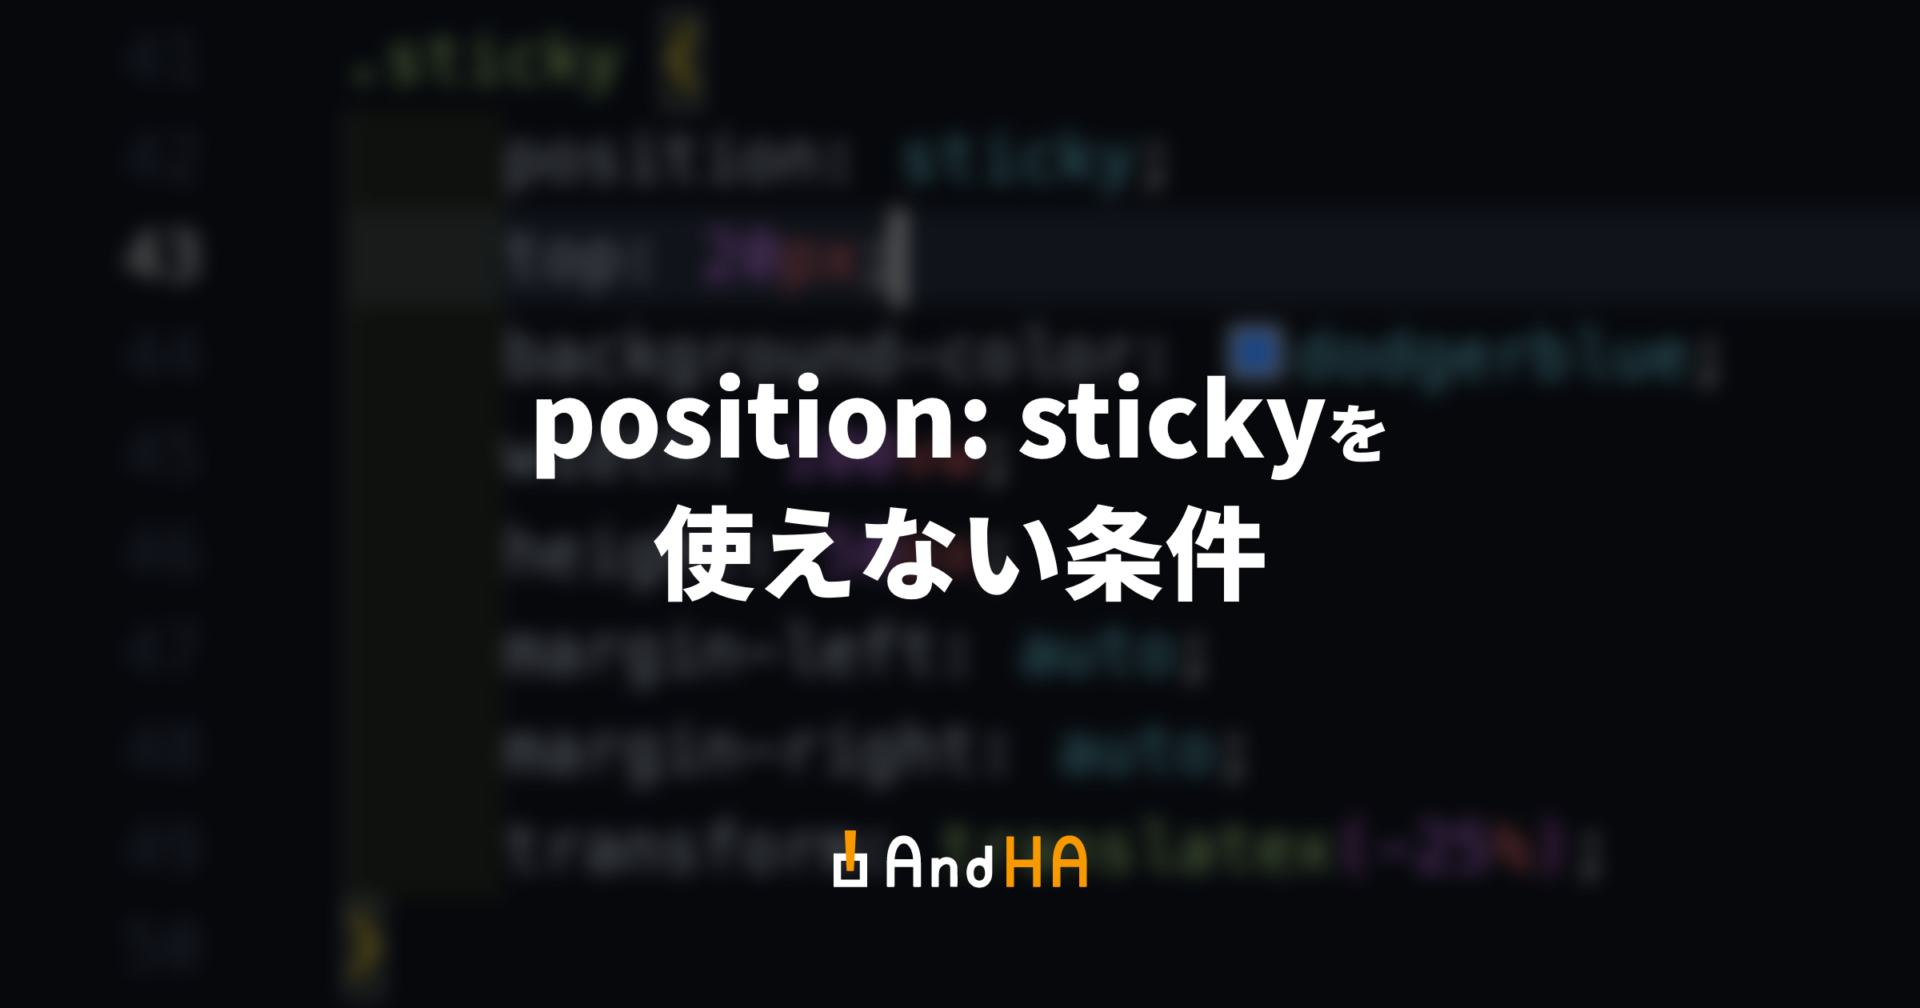 How to Fix position: sticky